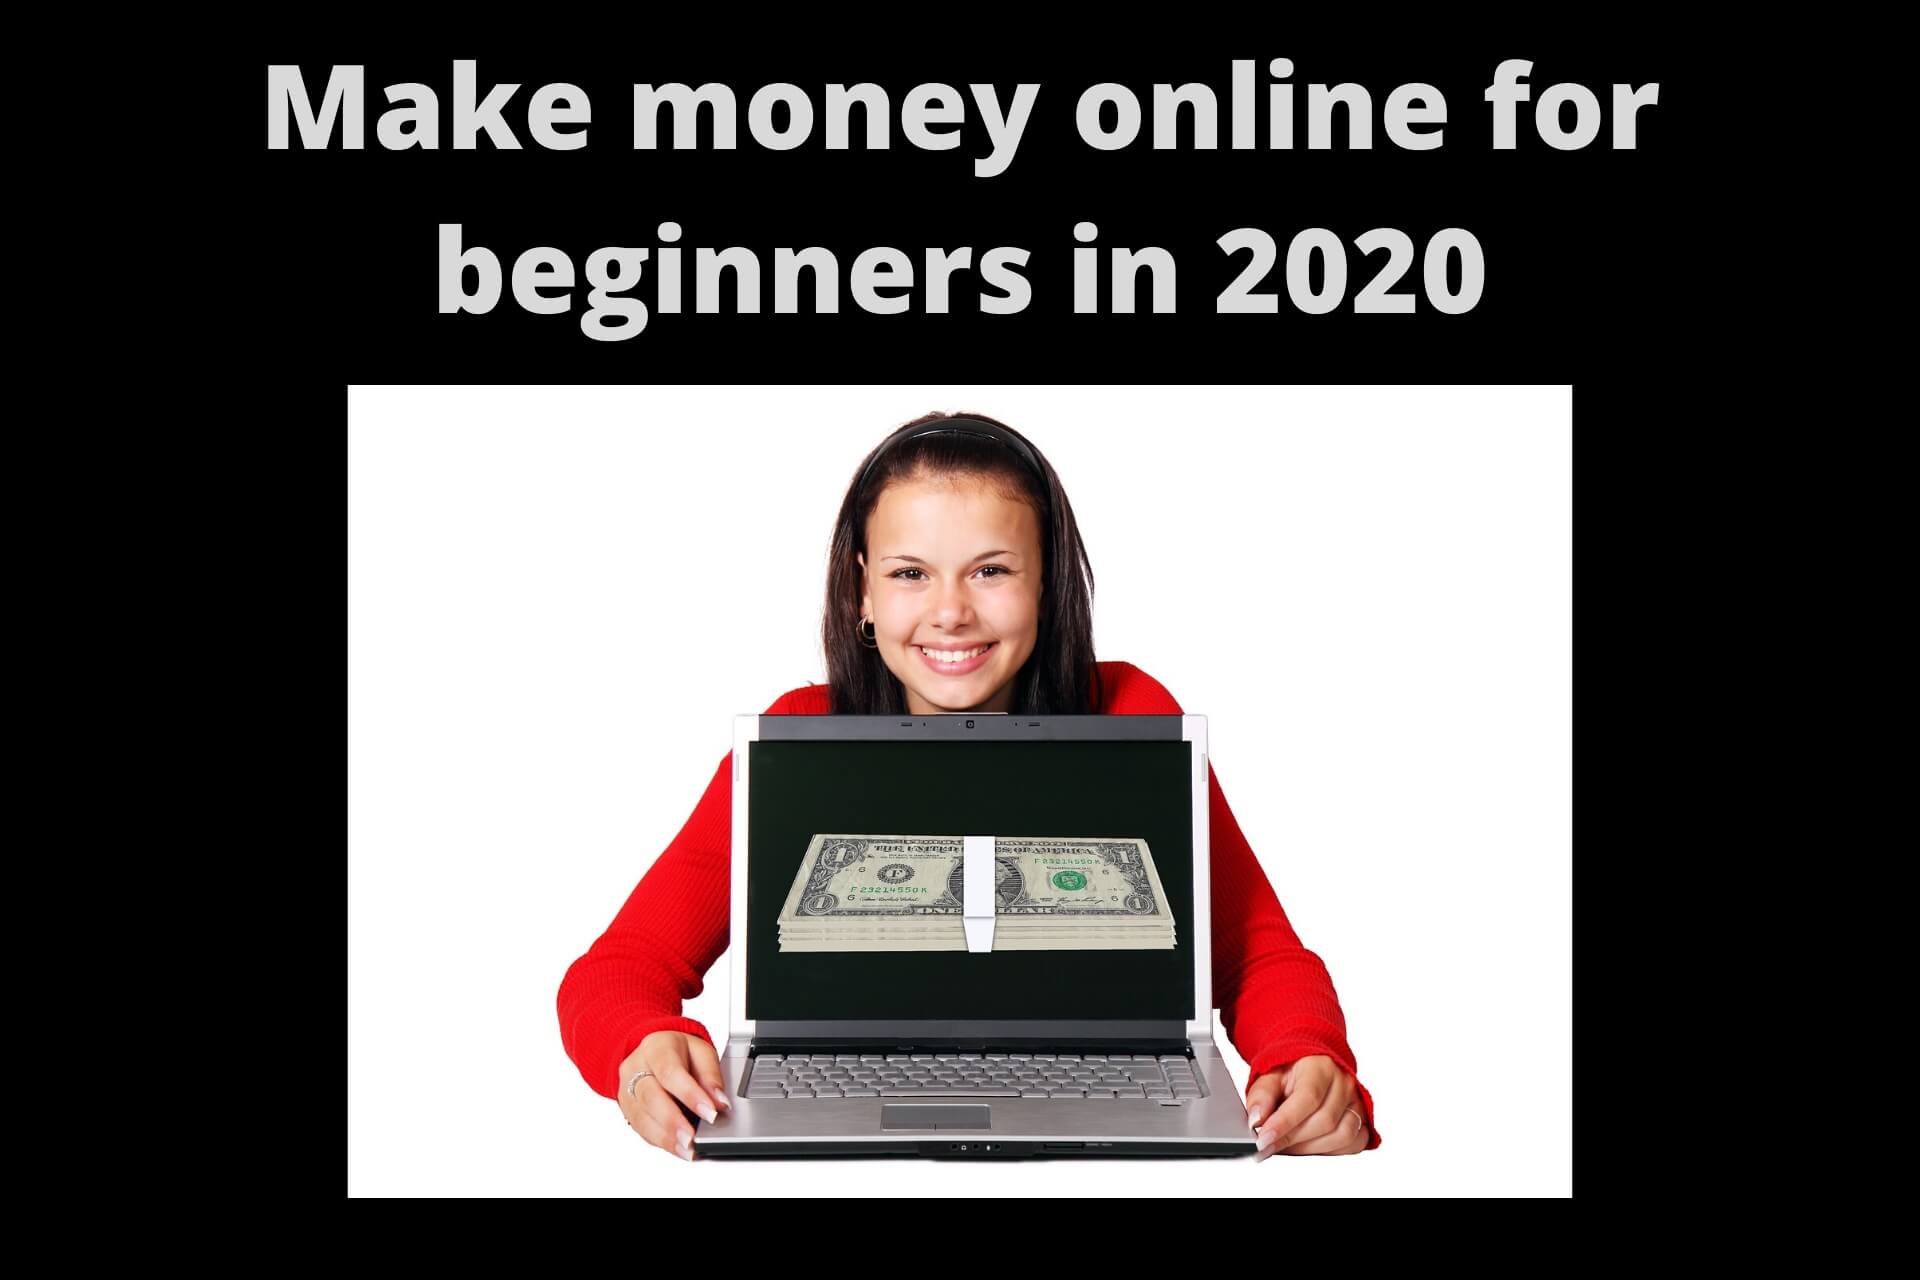 How to make money online for beginners in 2020 and beyond